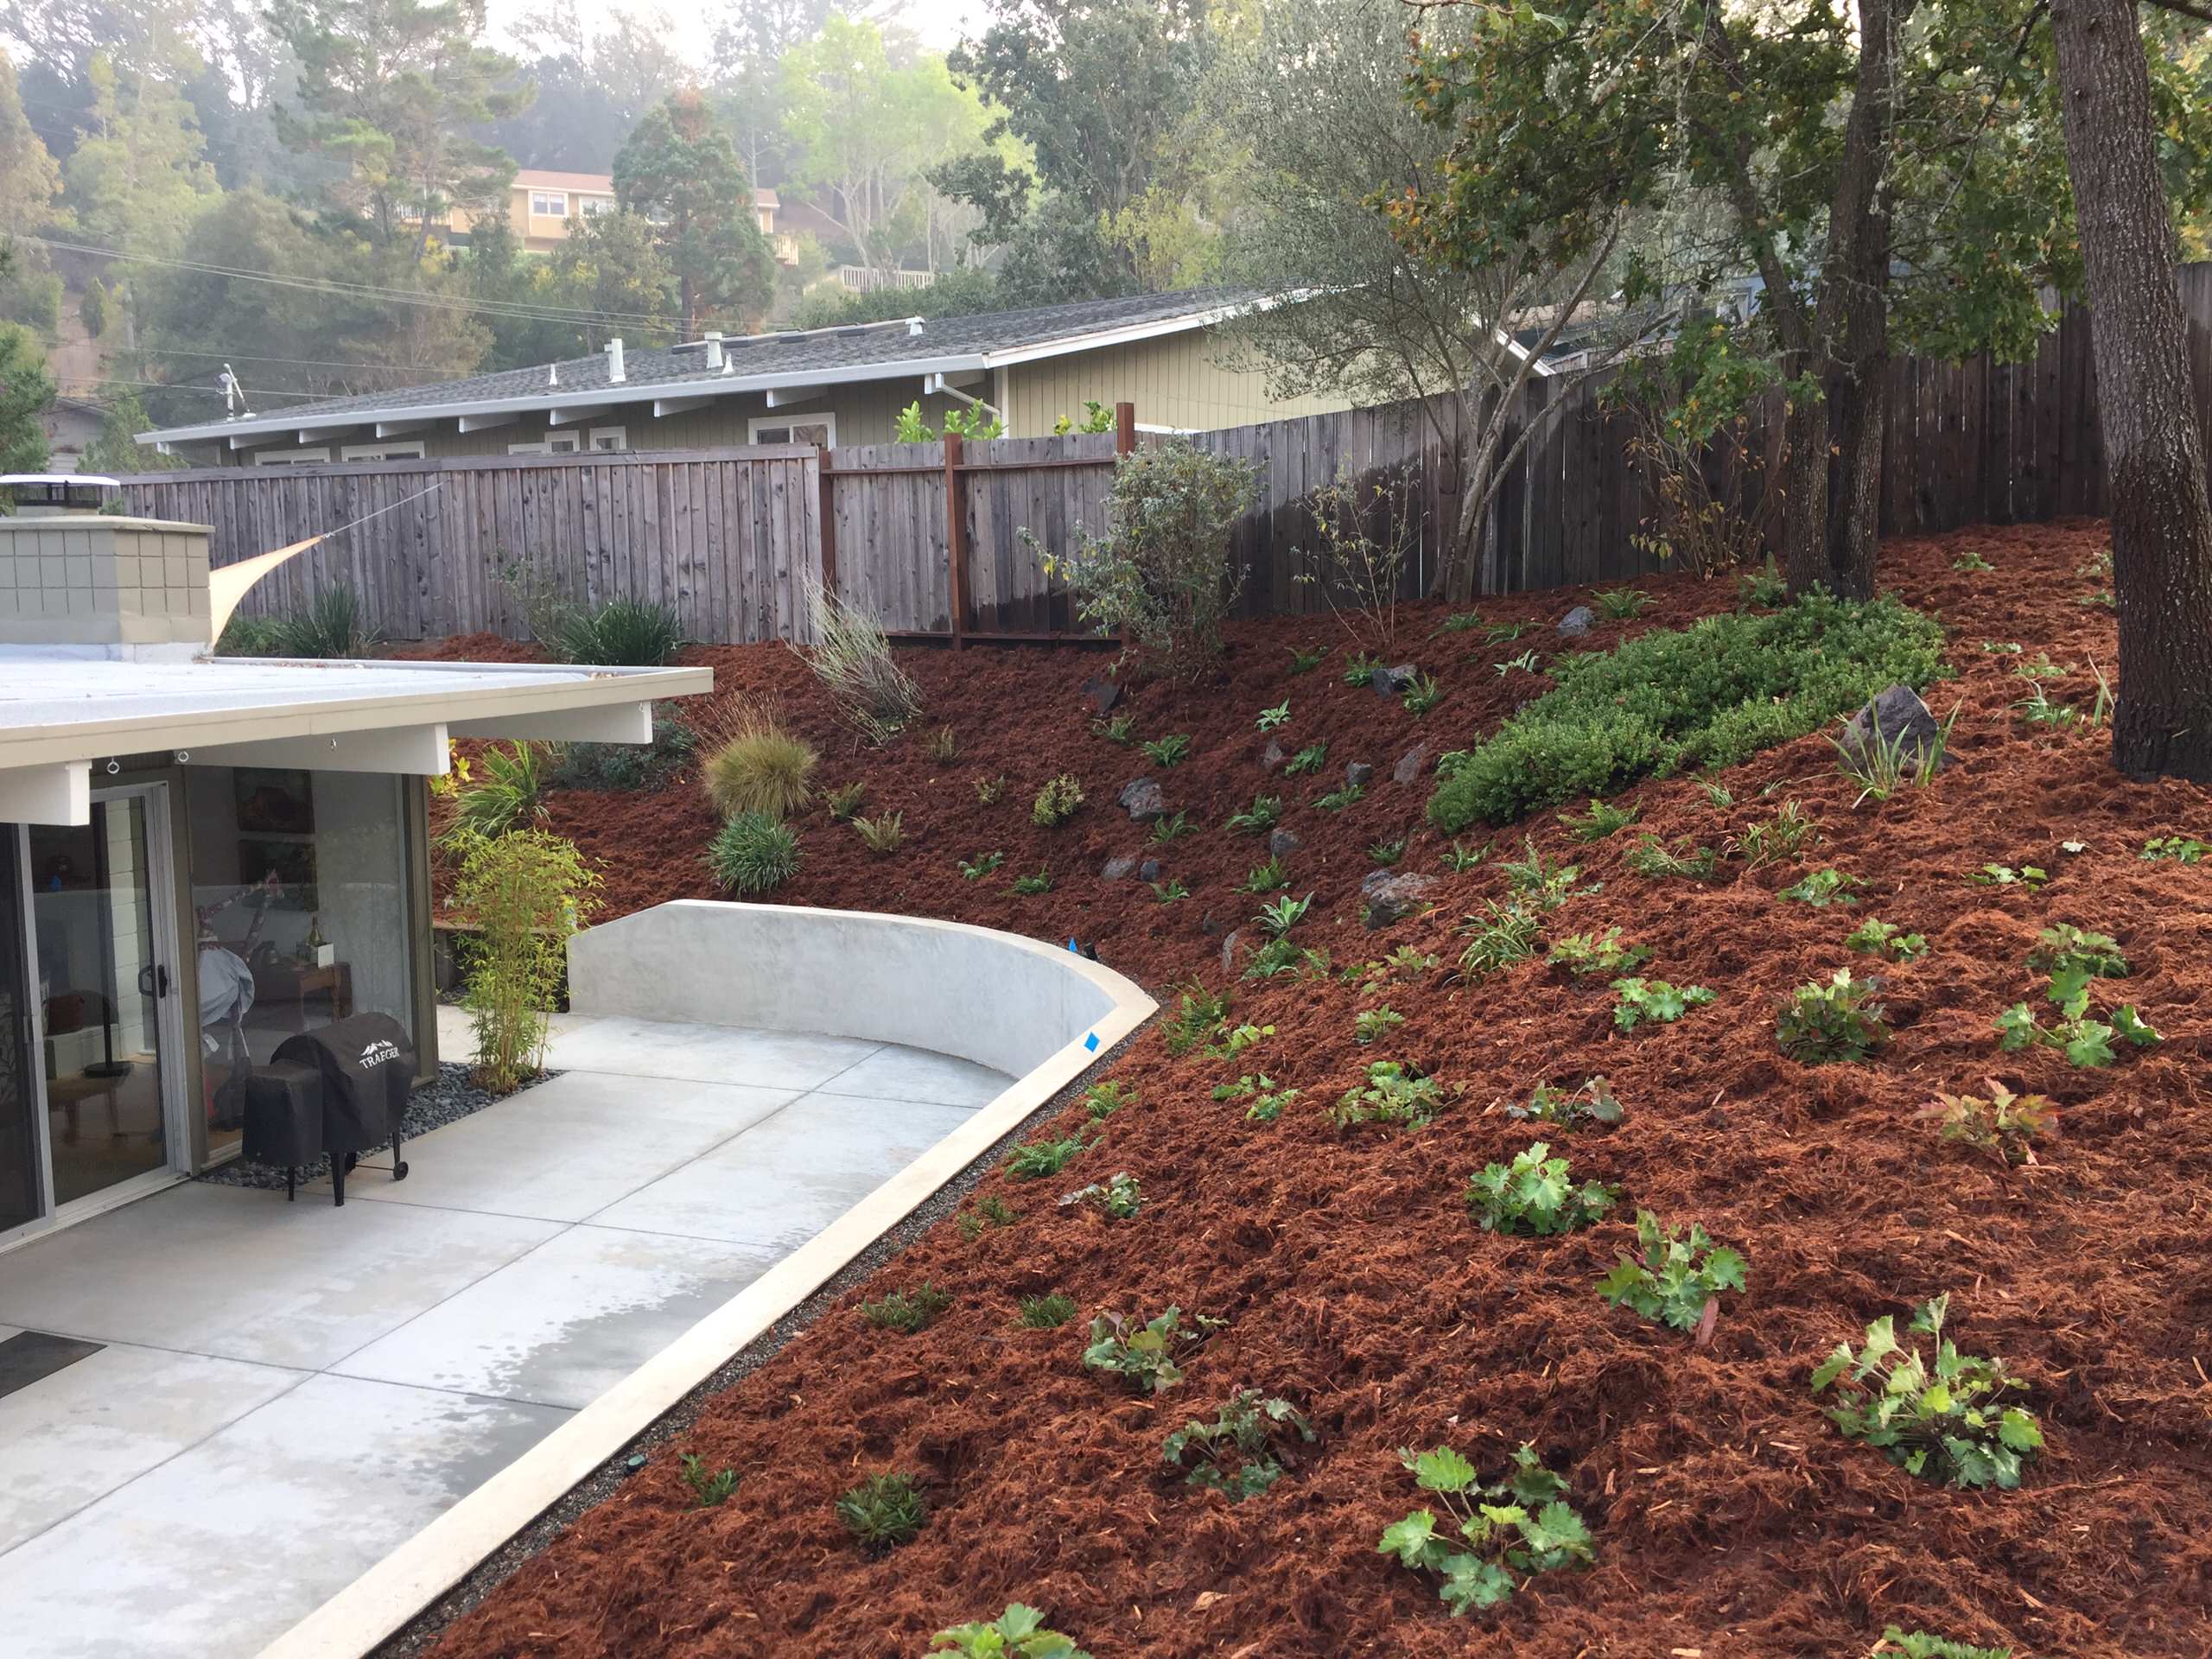 Ah, what a lucky day to get the call to help a wonderful couple with the landscape adorning their lovely Eichler home nestled next to open space in the warm hills of San Rafael. There was a failing wo